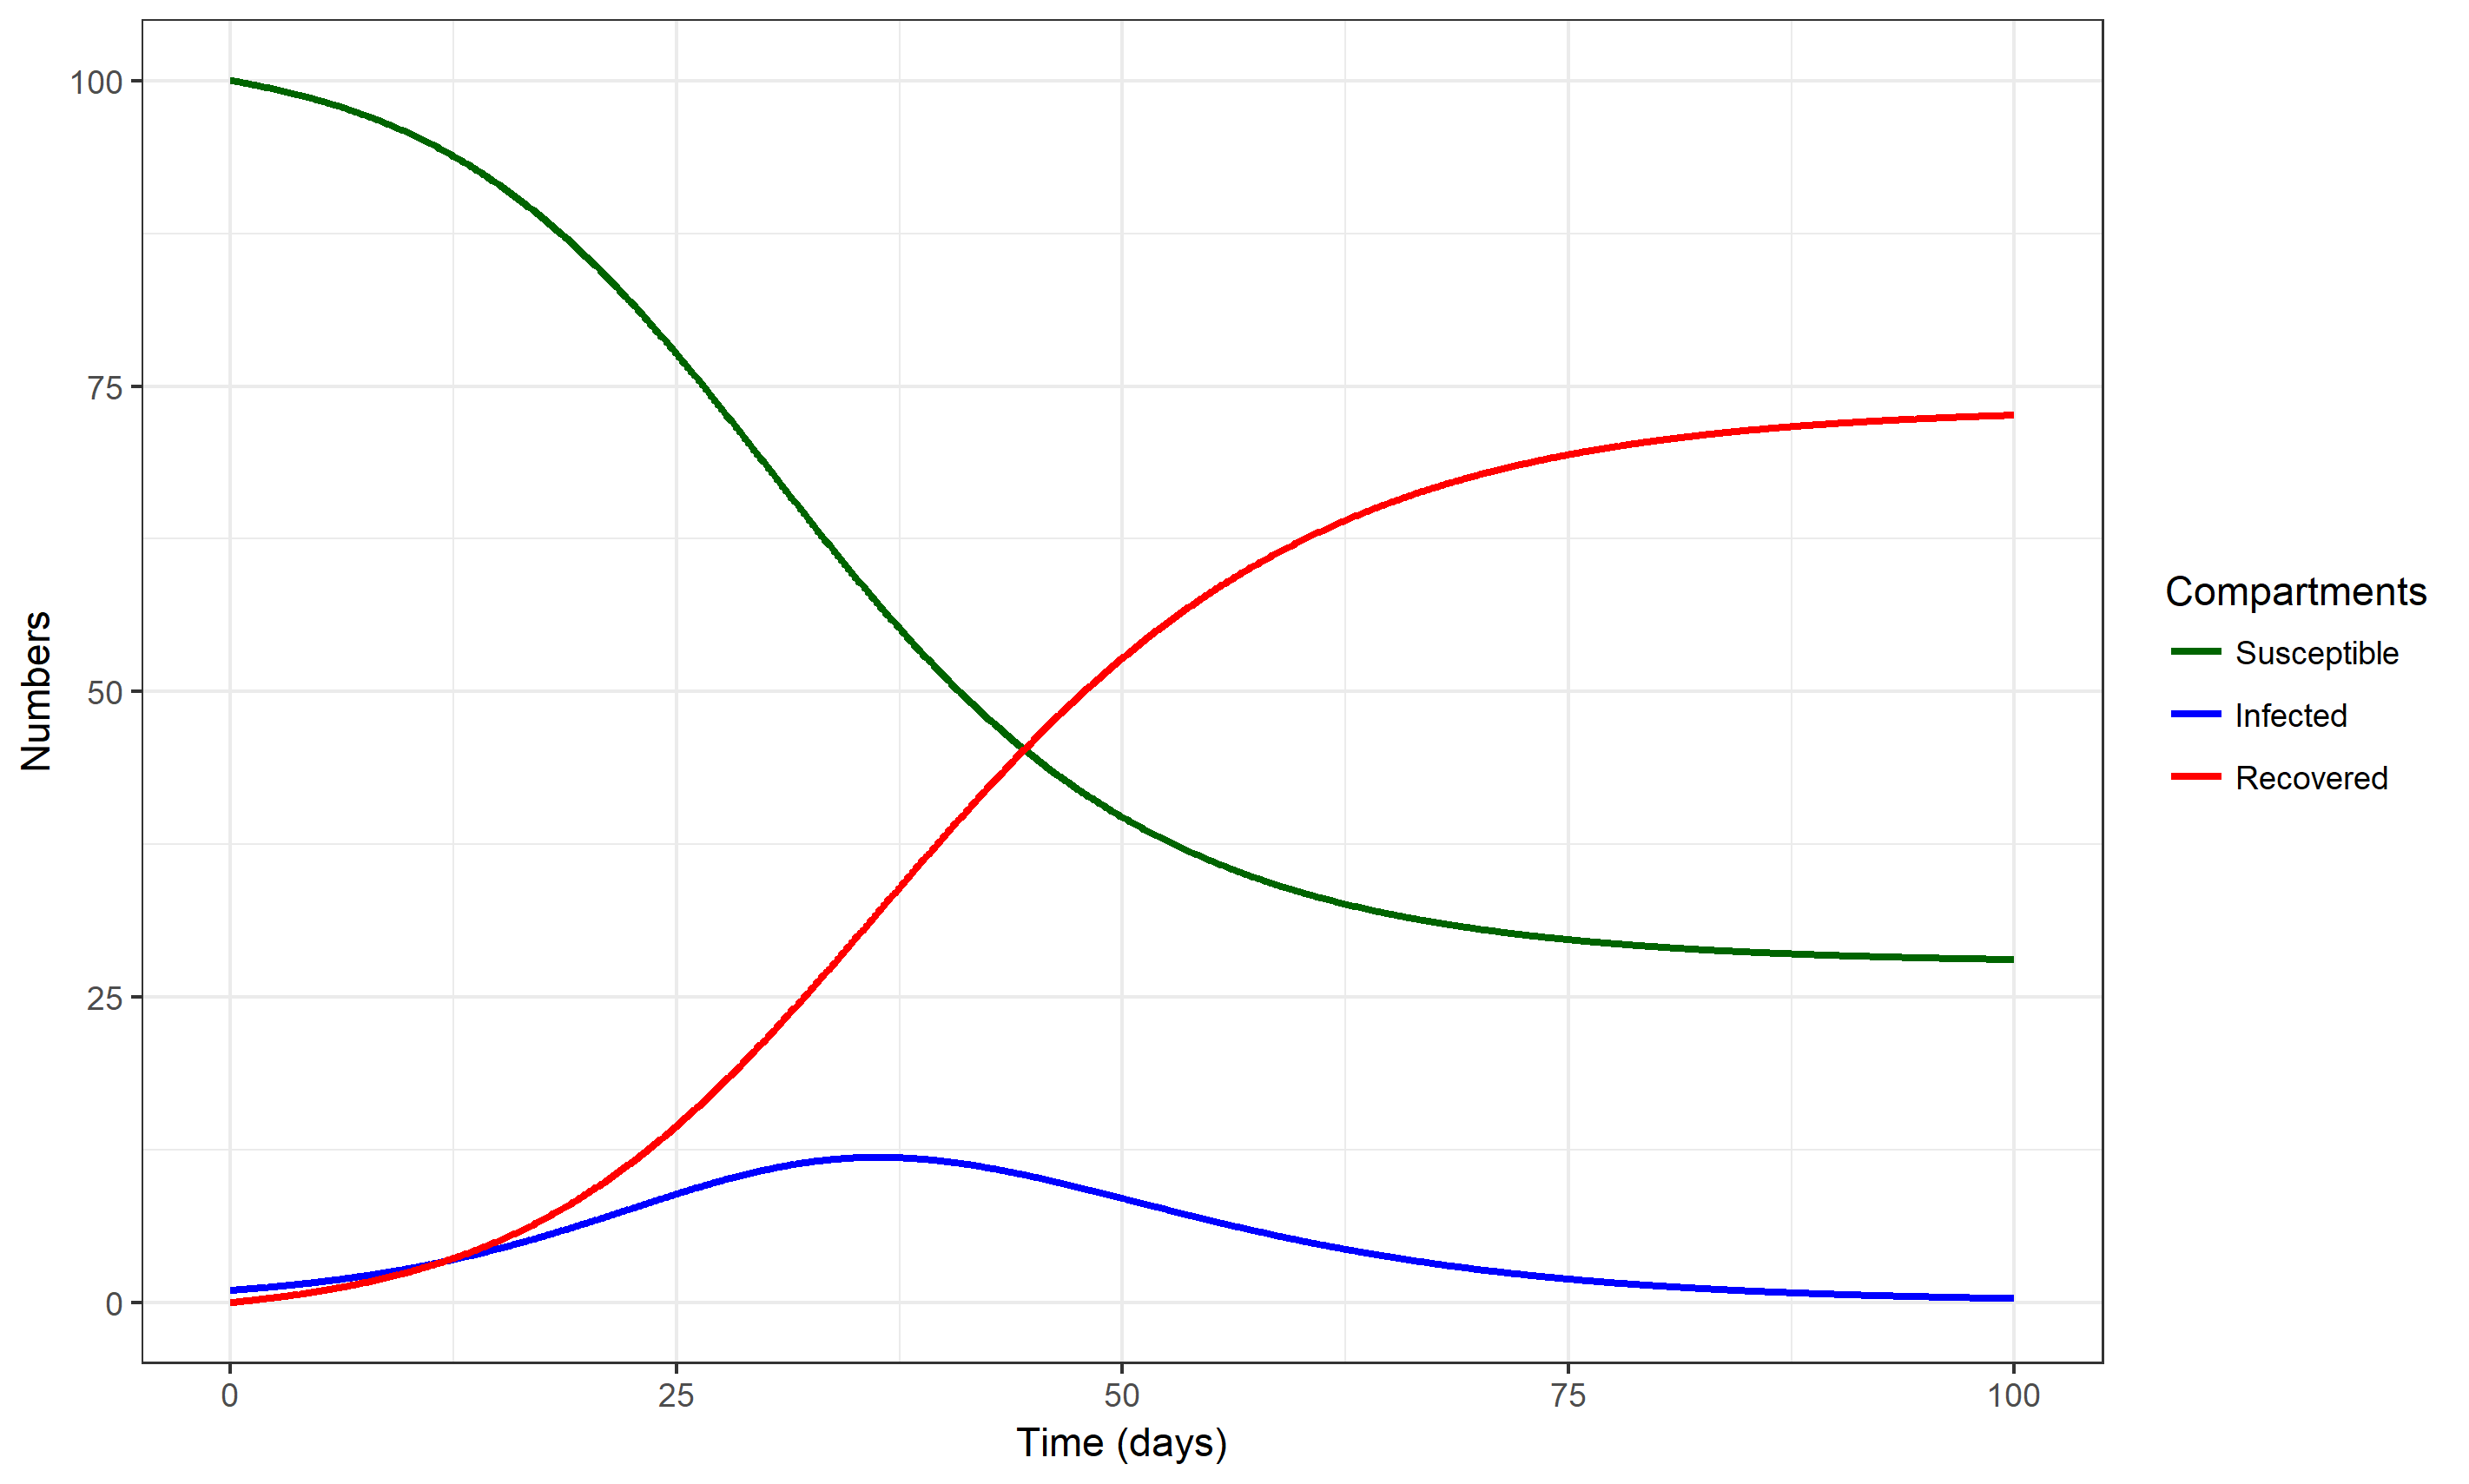 An outbreak simulation using the simple SIR model. Values for parameters are chosen as b=0.0025/days and g = 1/(7 days). The starting conditions for each compartment are set to S=100, I=1, R=0.